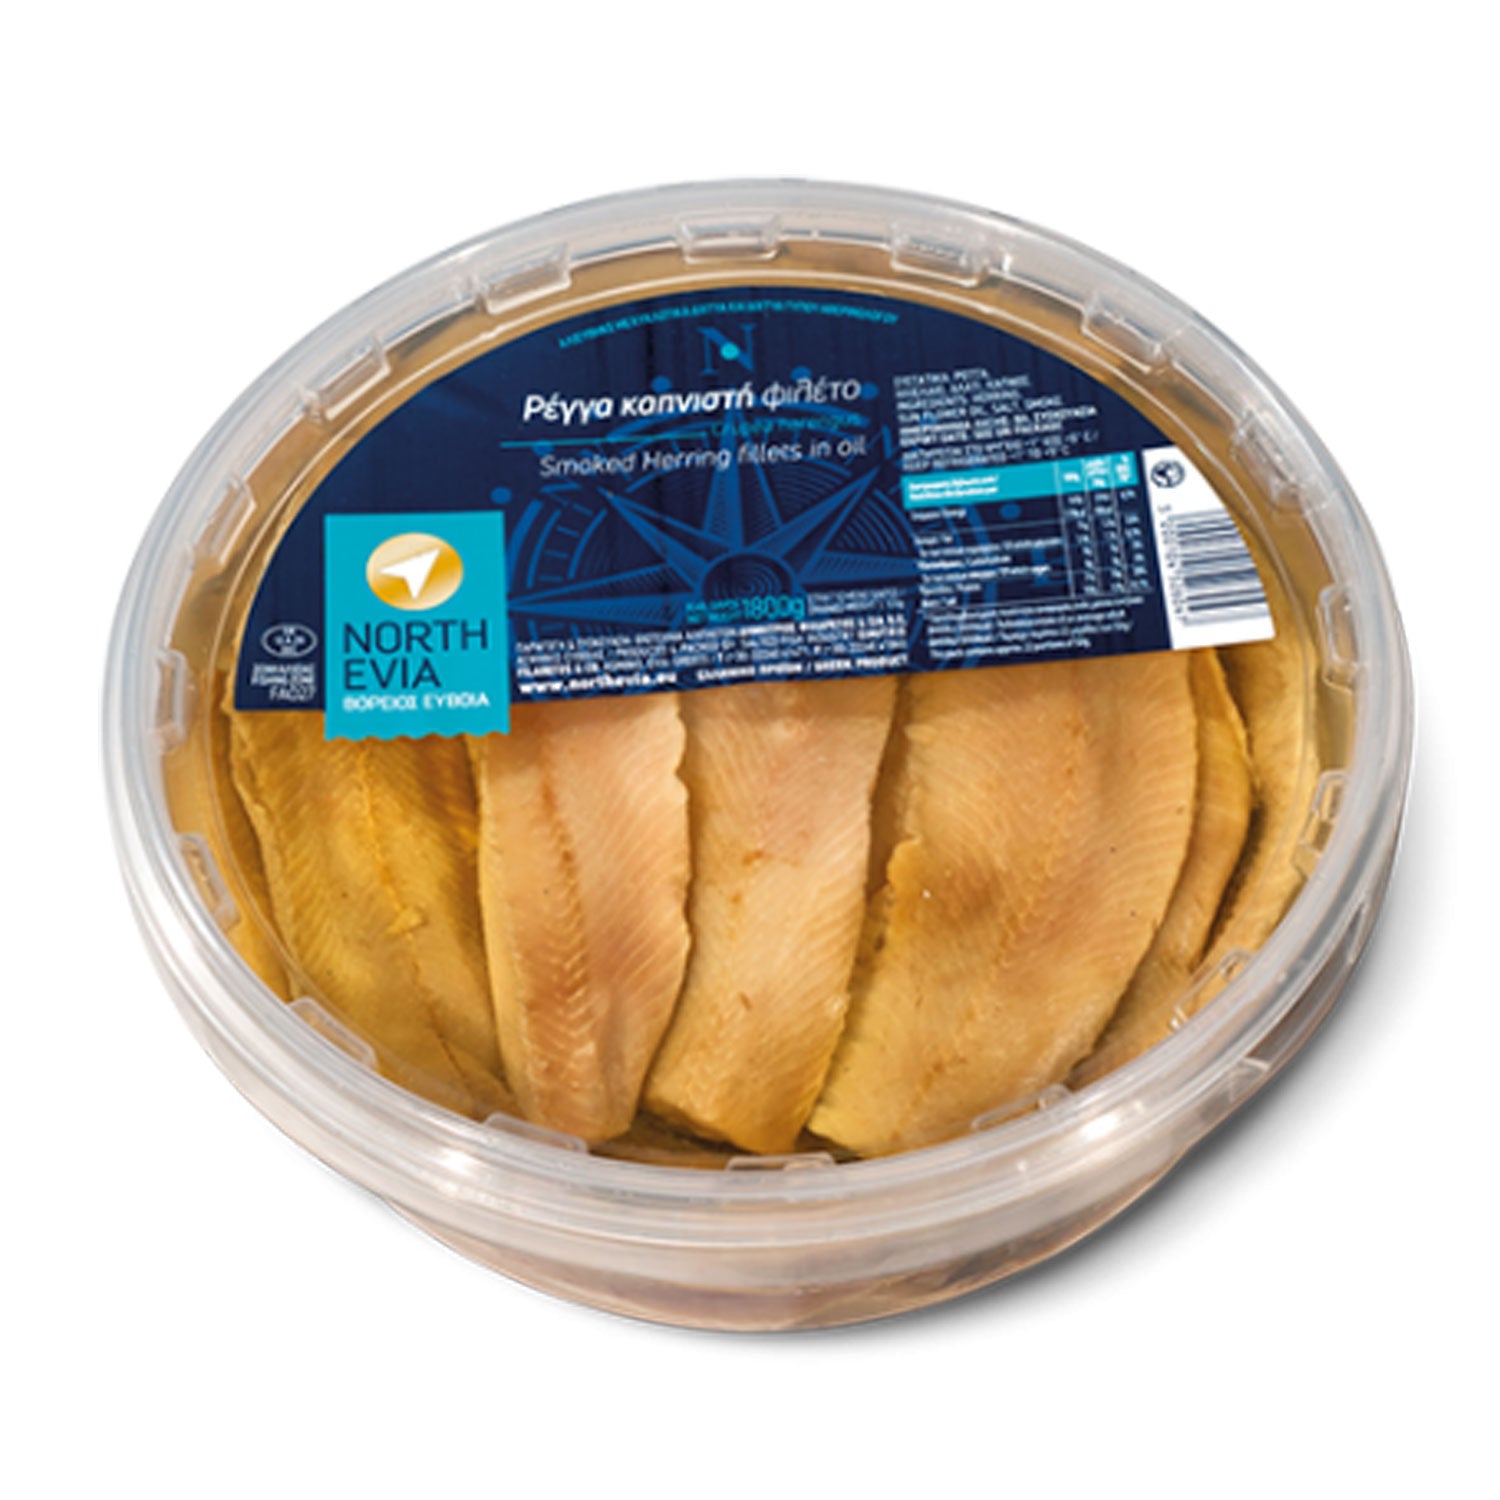 greek-products-smoked-herring-fillets-from-evia-2kg